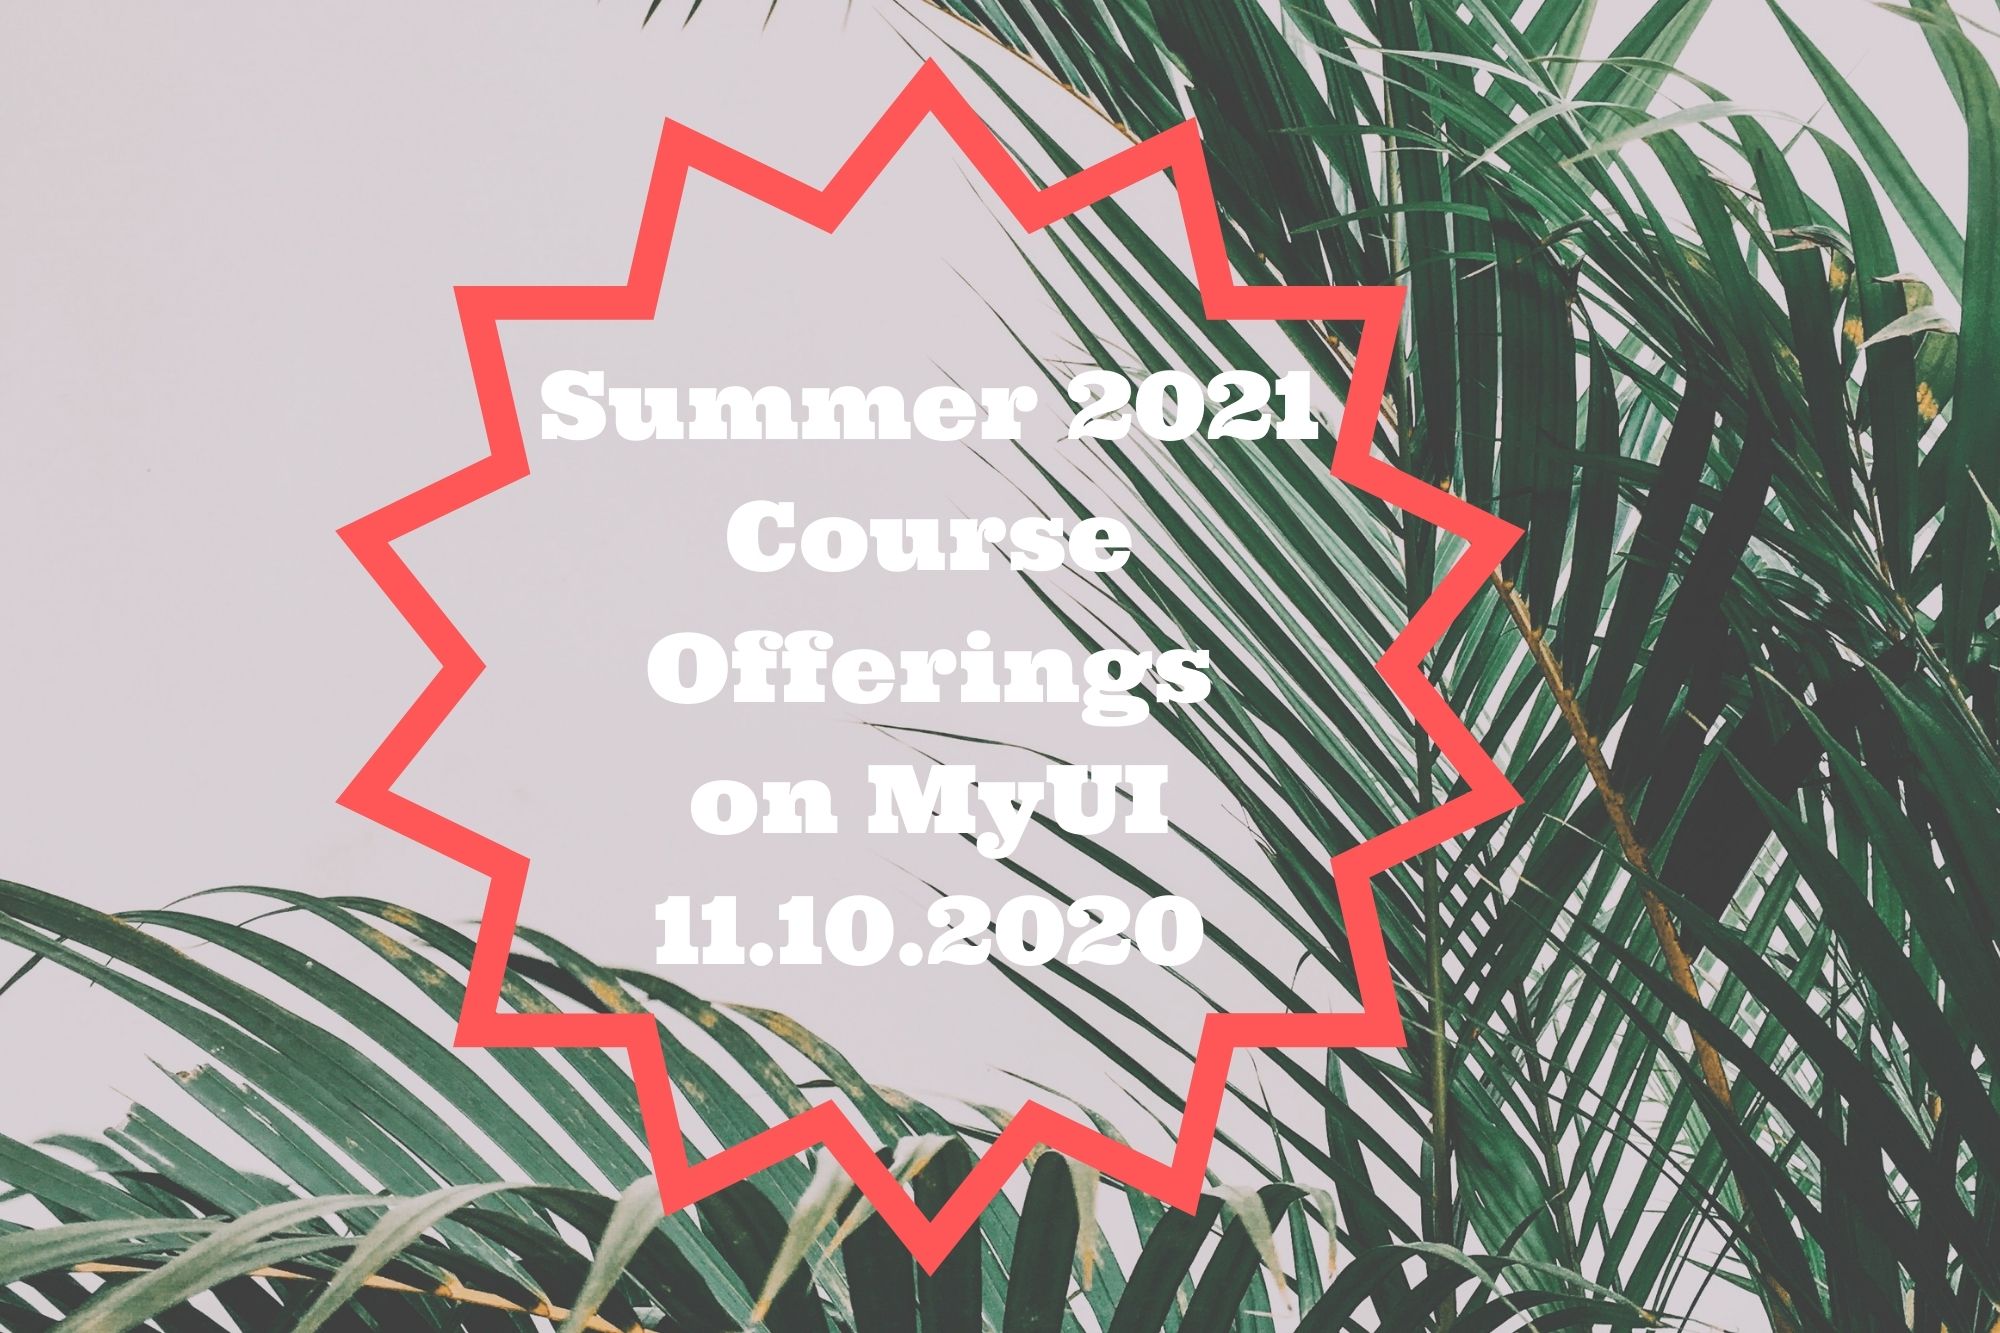 Summer courses on MyUI